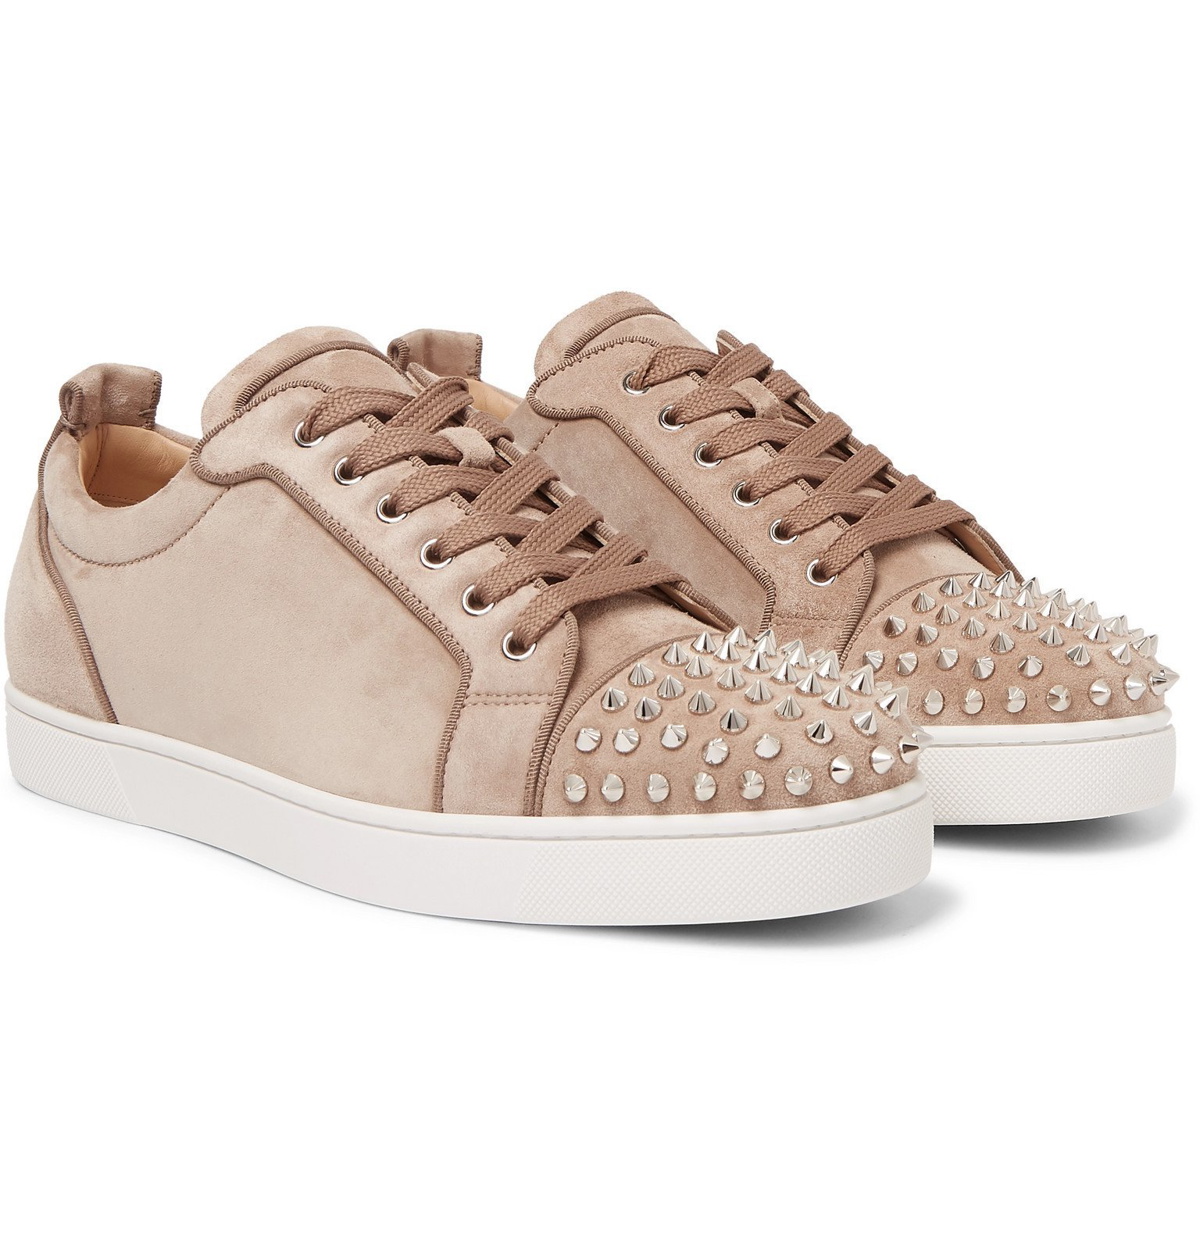 Christian Louboutin Louis Junior Spikes White/Beige Sneakers New